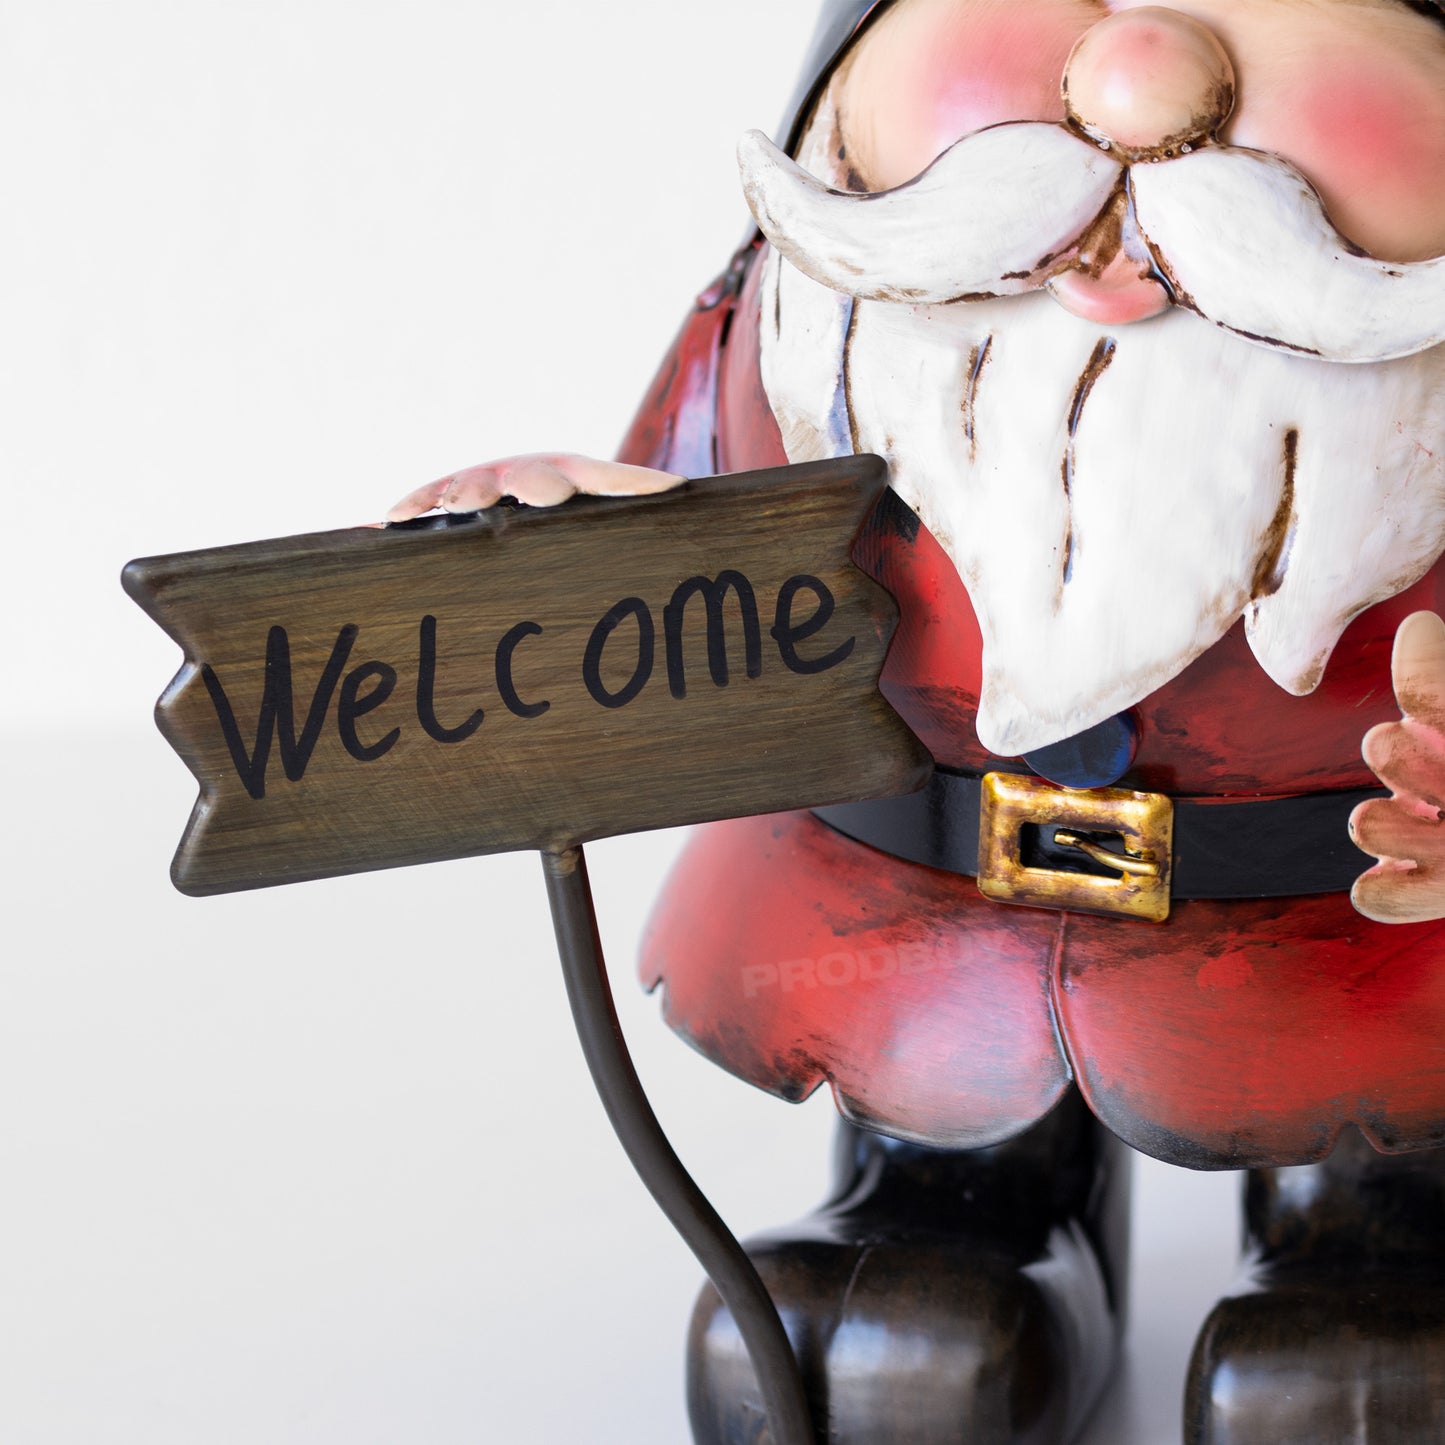 Metal Garden Gnome with Welcome Sign 31cm Decorative Ornament